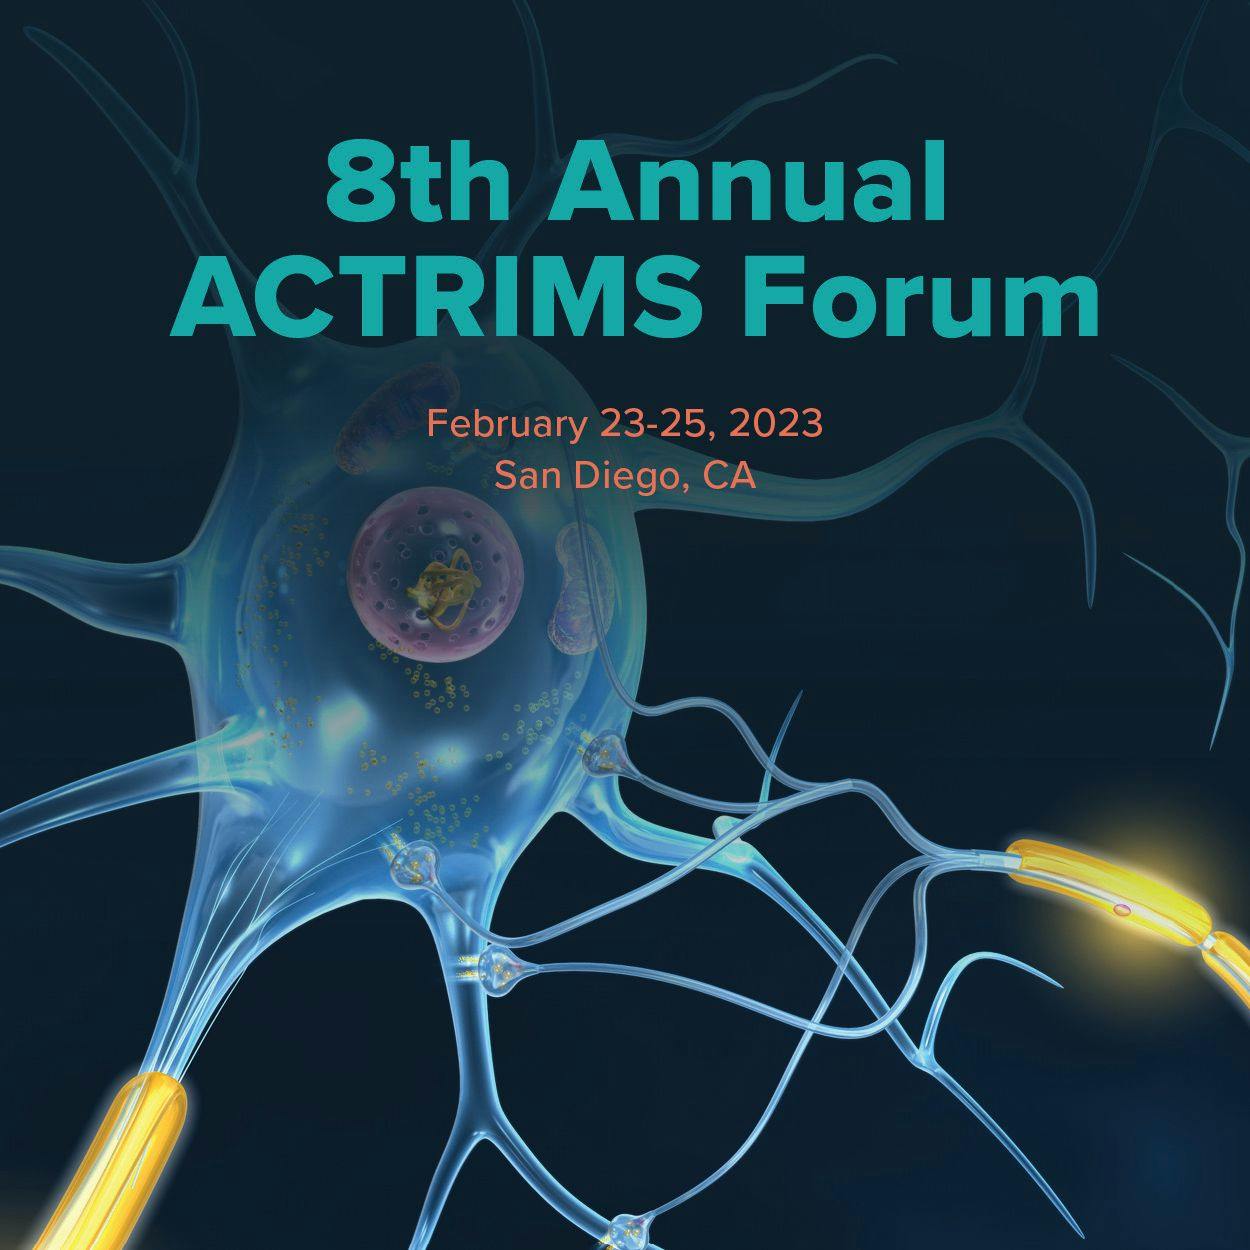 Recapping Research From 2023 ACTRIMS